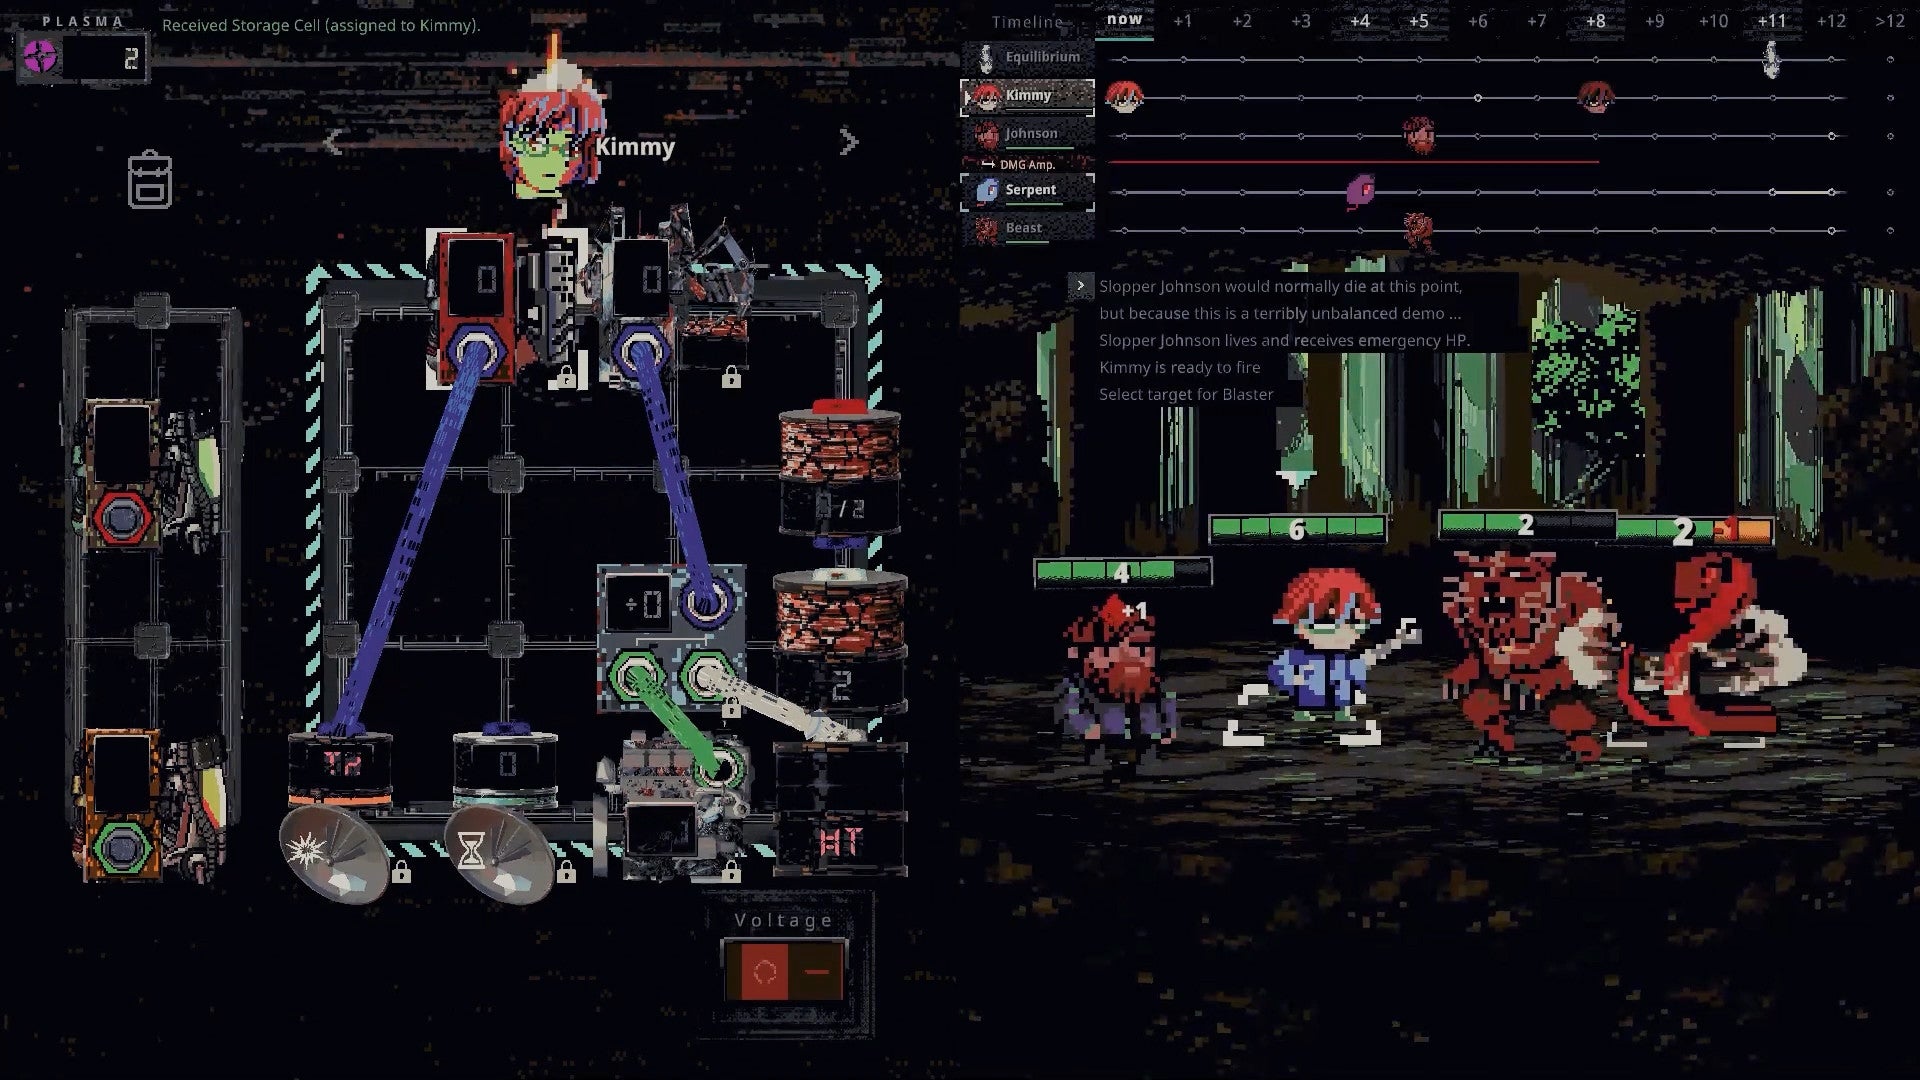 A grungy pixel art style shows a wired-up modular machine on the left and a turn-based RPG-style party battle on the right in Slopper Johnson: Graviton Agent.